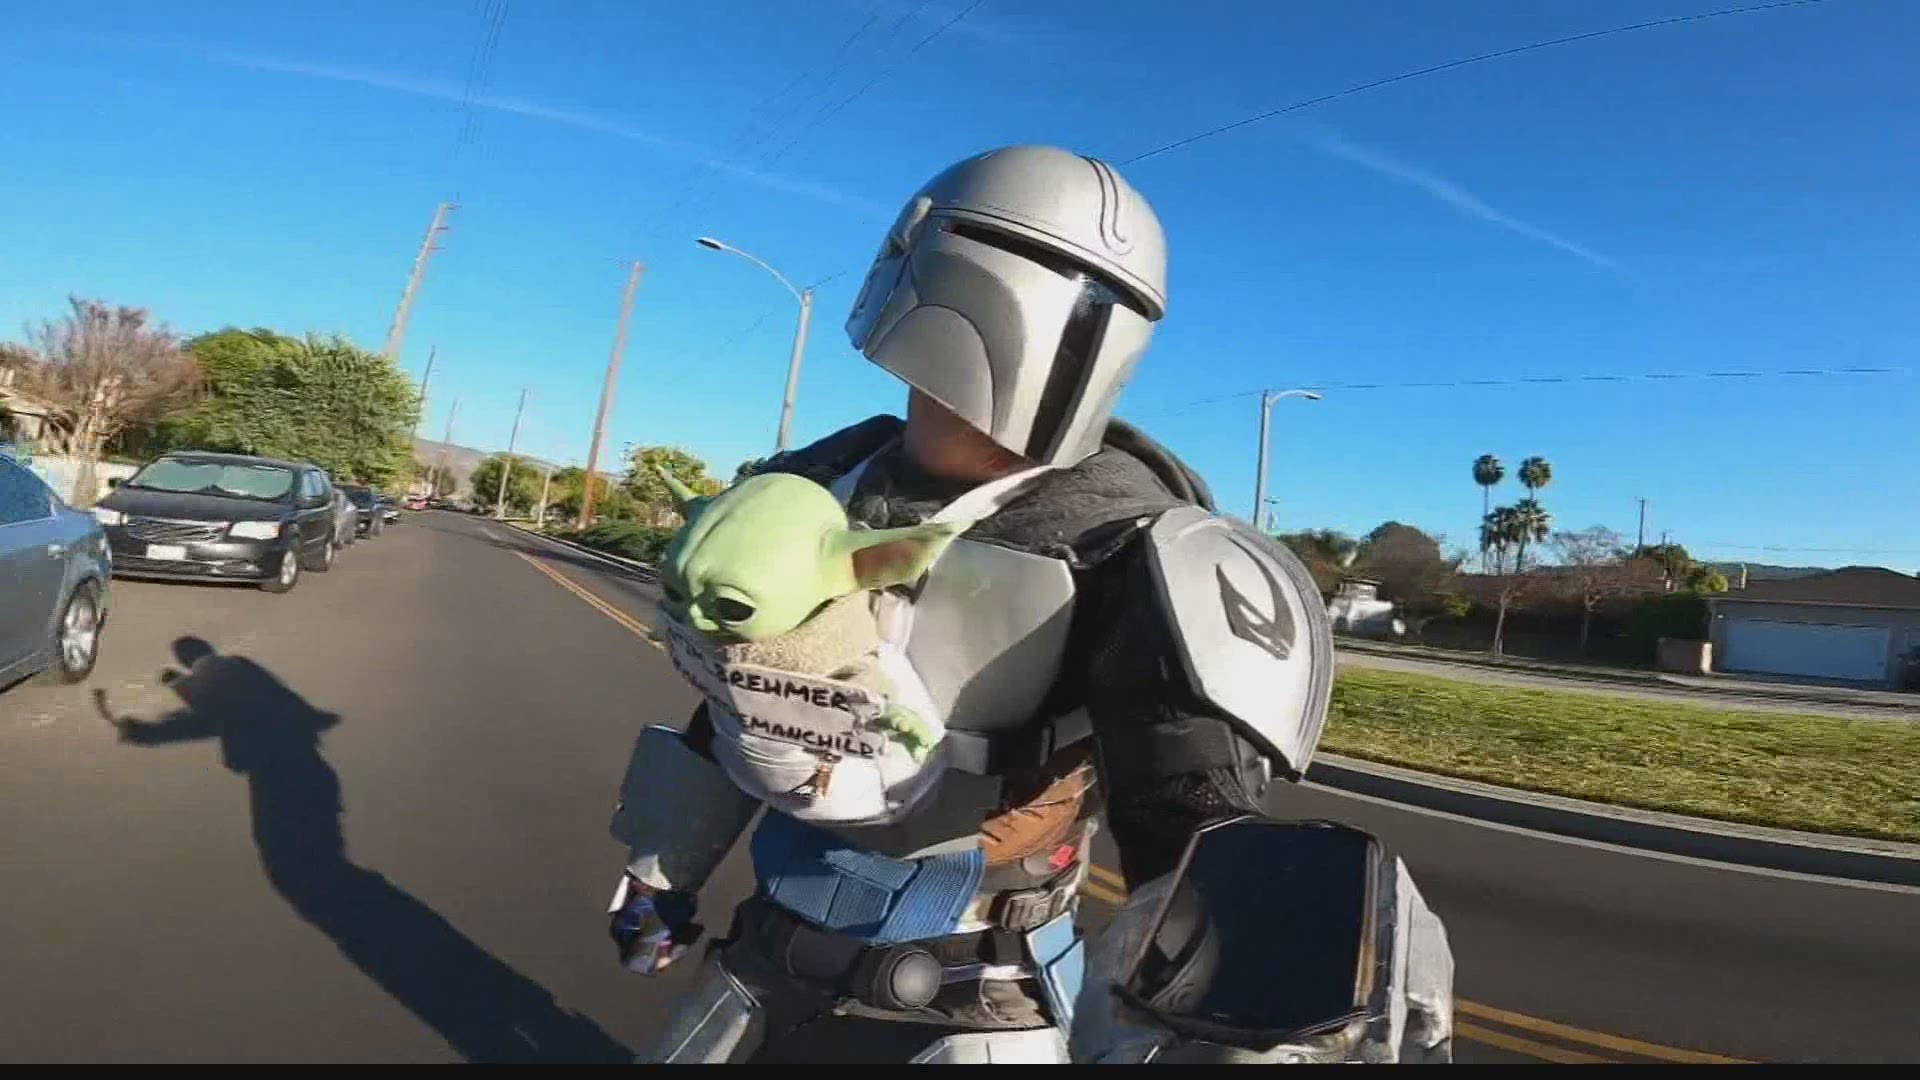 Los Angeles comedian Tim Brehmer decided to put a smile on people's faces by dressing up and riding a skateboard as  the Mandalorian — accompanied with Baby Yoda.